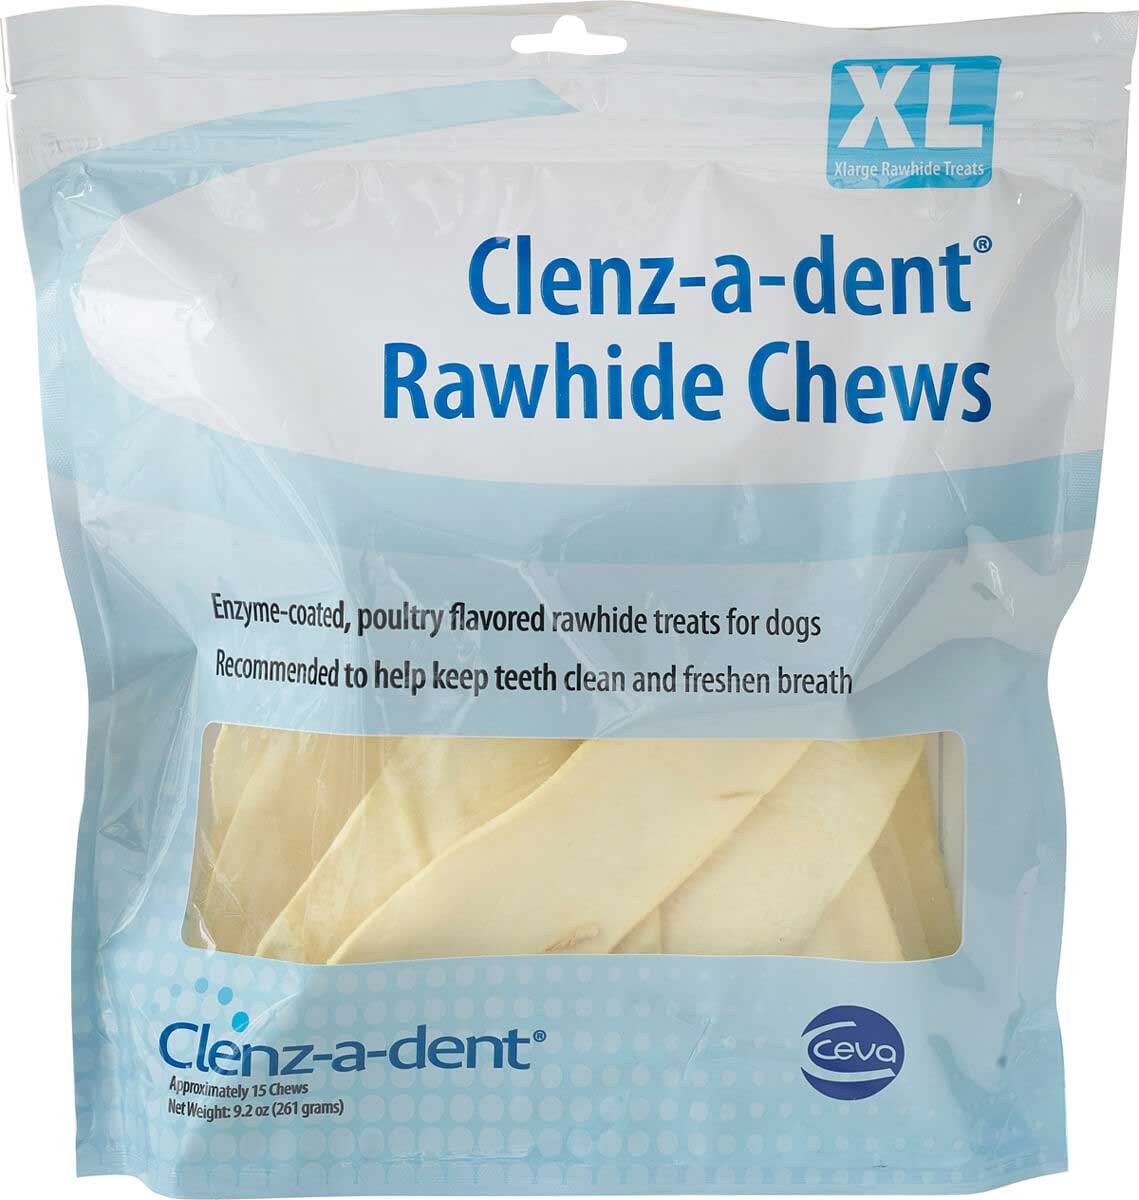 Clenz-a-dent Rawhide Chews 15 count for extra large dogs over 51 lbs 1